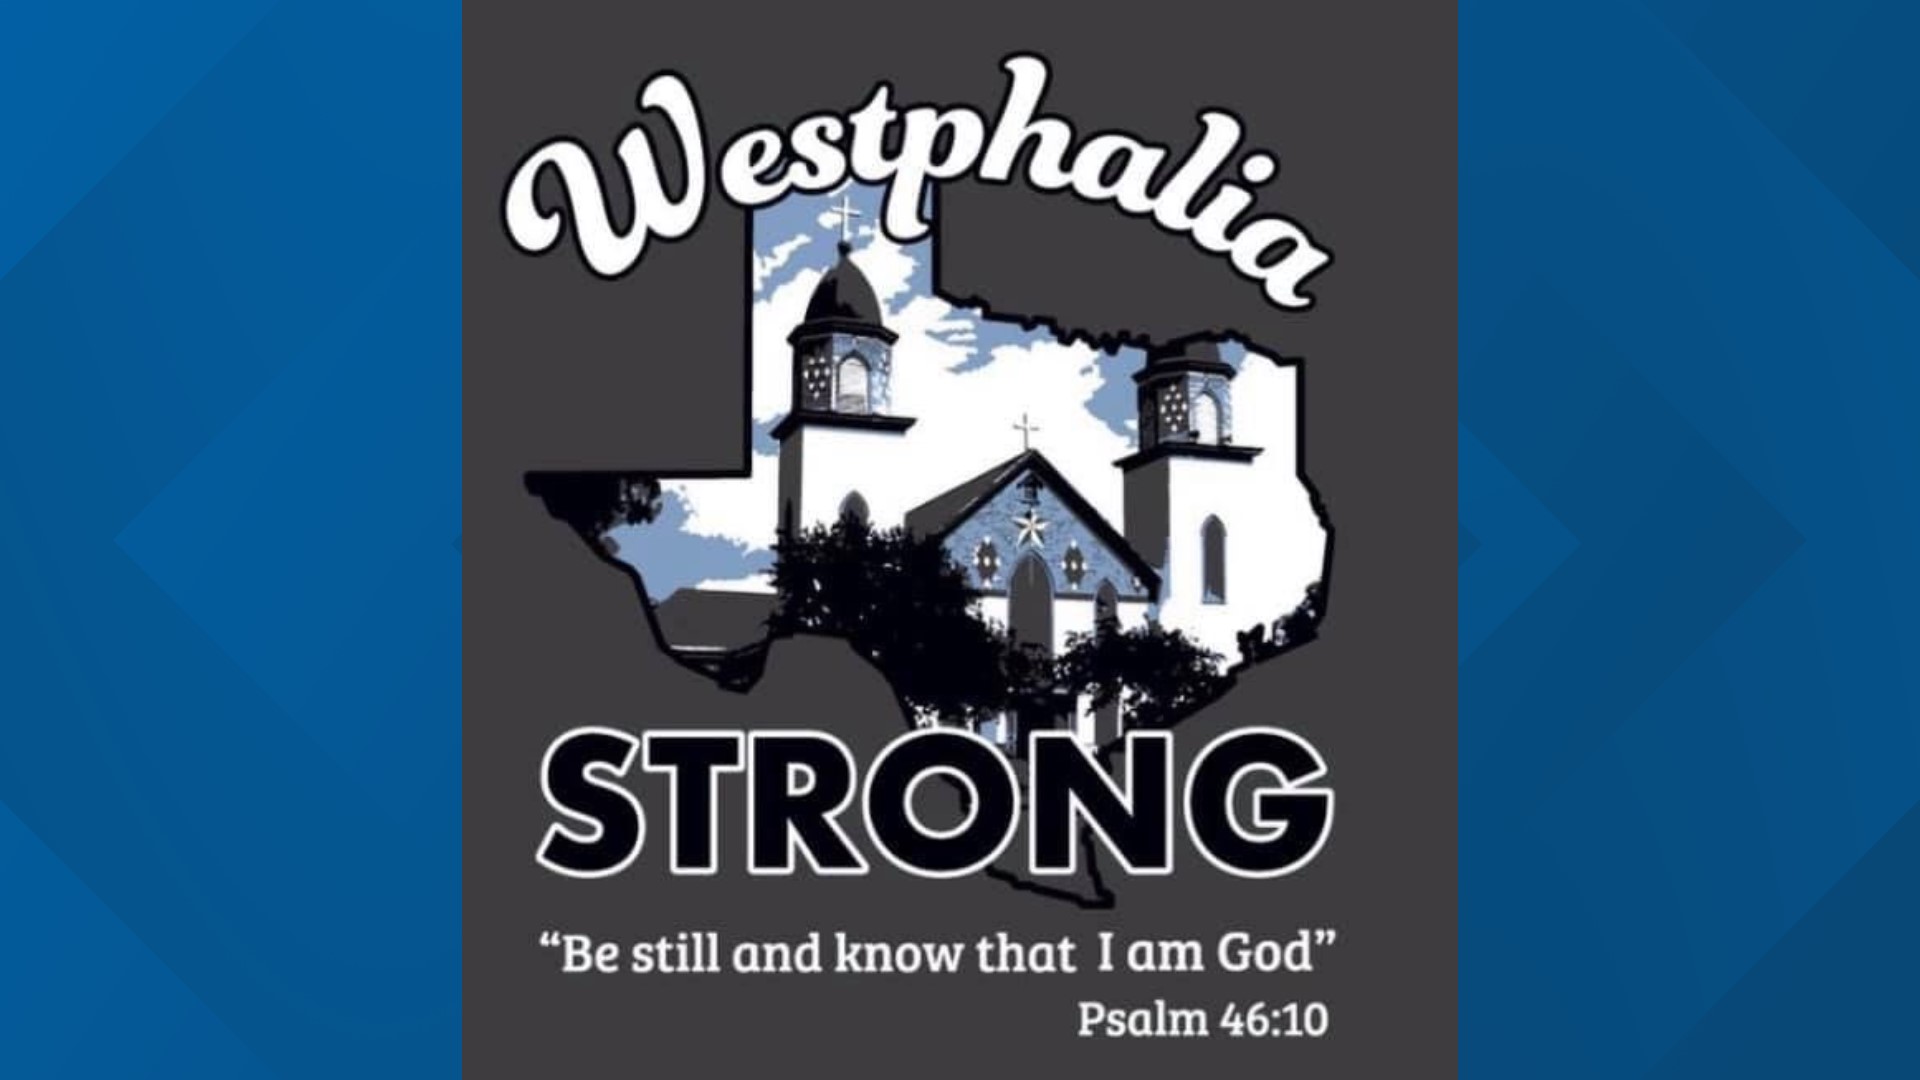 Members of the Church of Visitation will be selling t-shirts to raise funds for the historic church that destroyed by a fire.